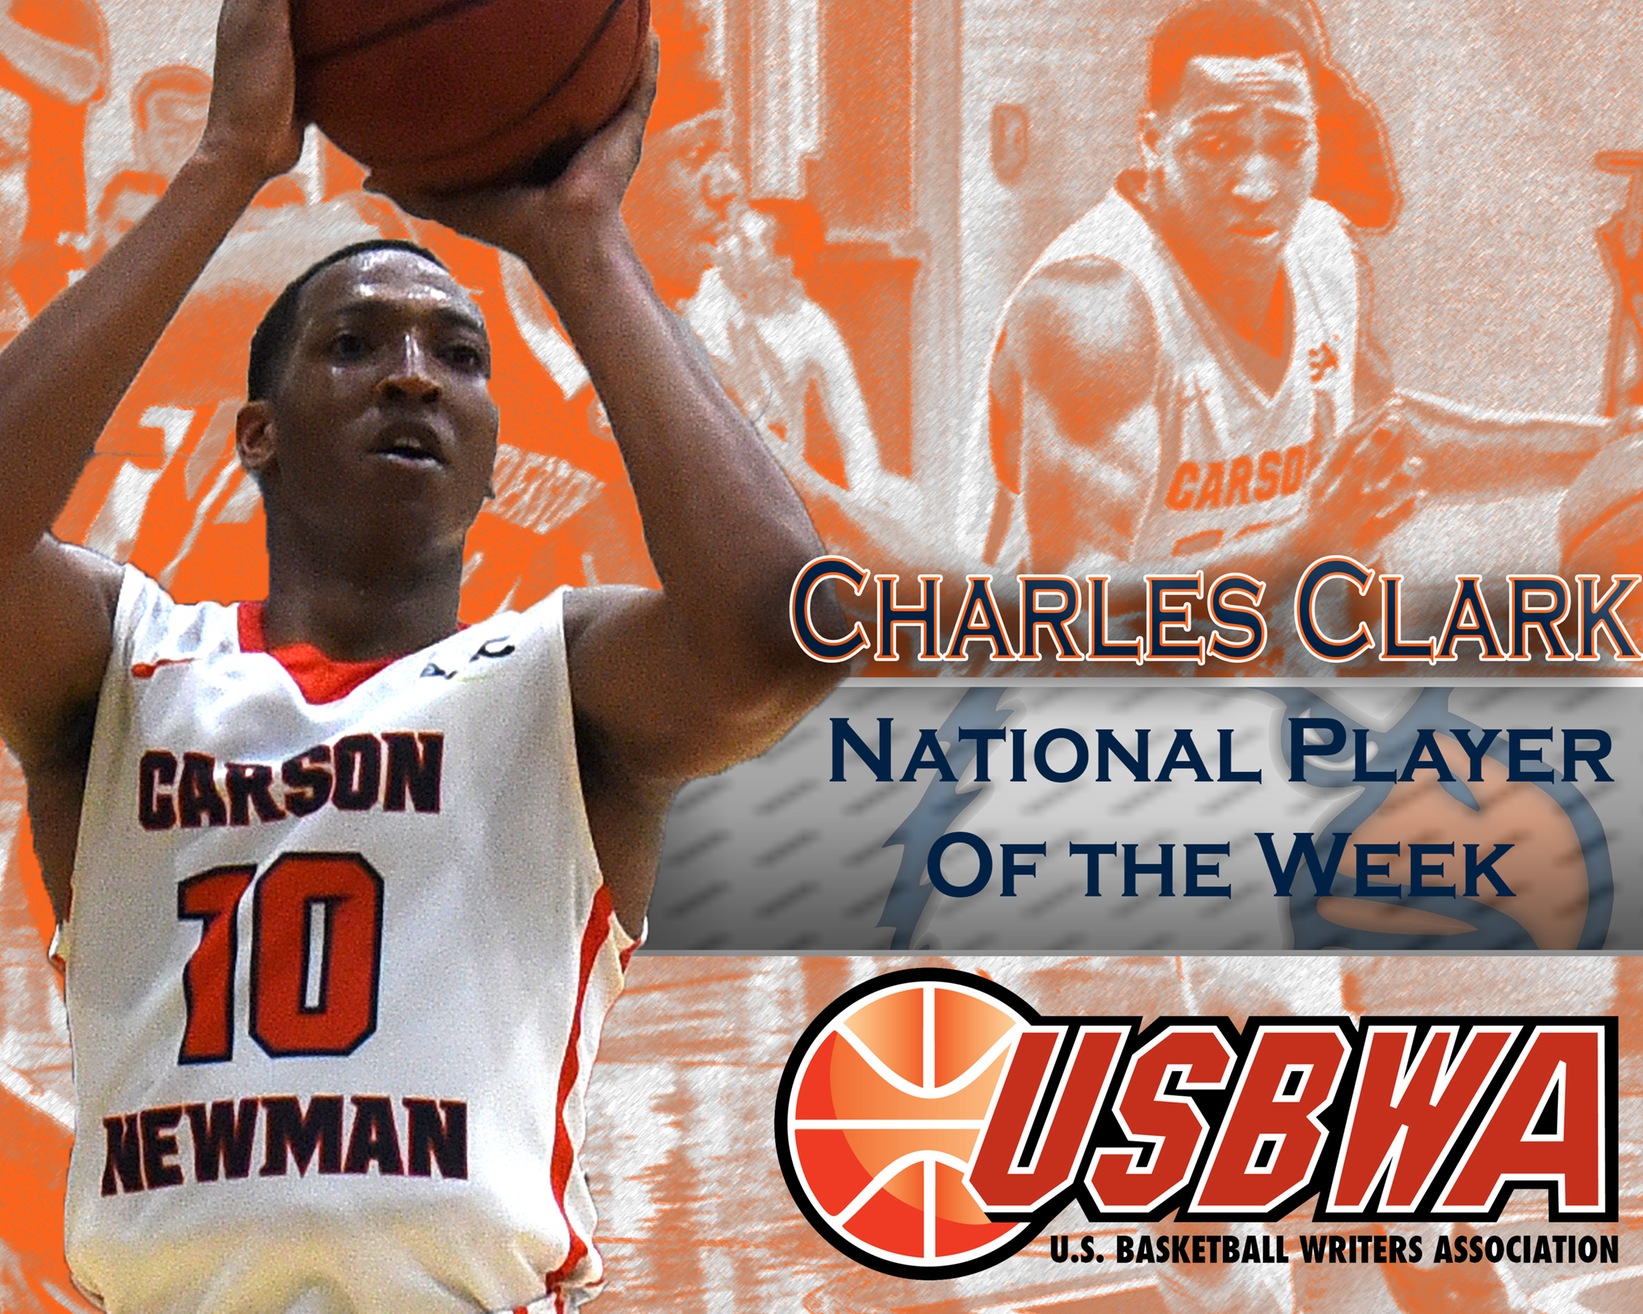 Third one’s a charm, Clark picks up more hardware as USBWA national player of the week